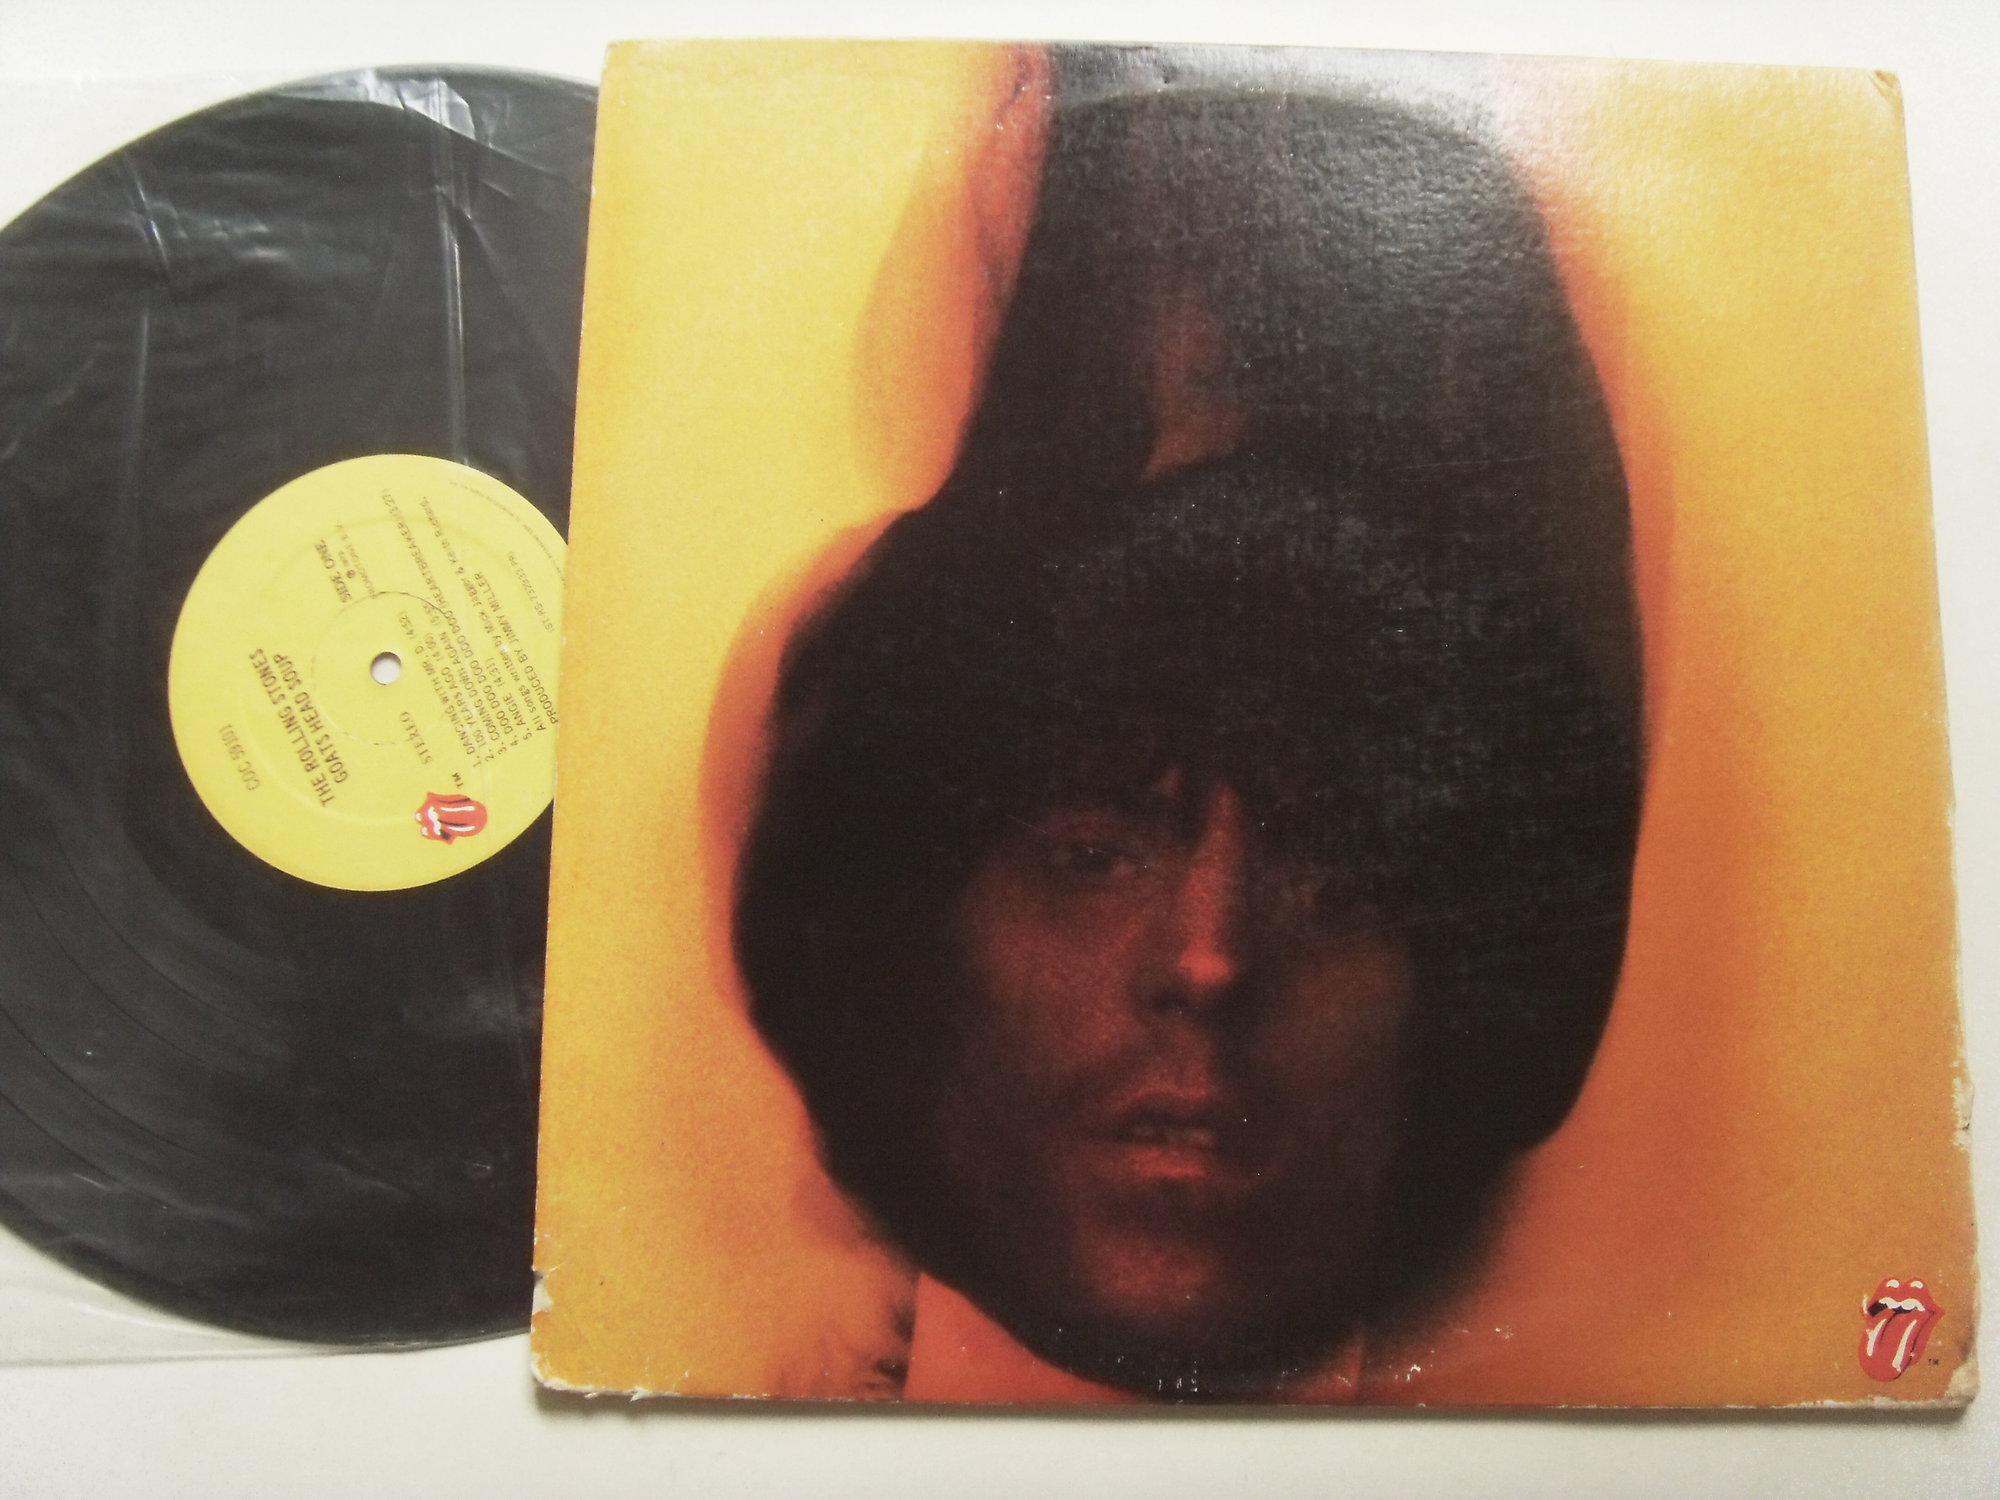 THE ROLLING STONES Goats Head Soup 2